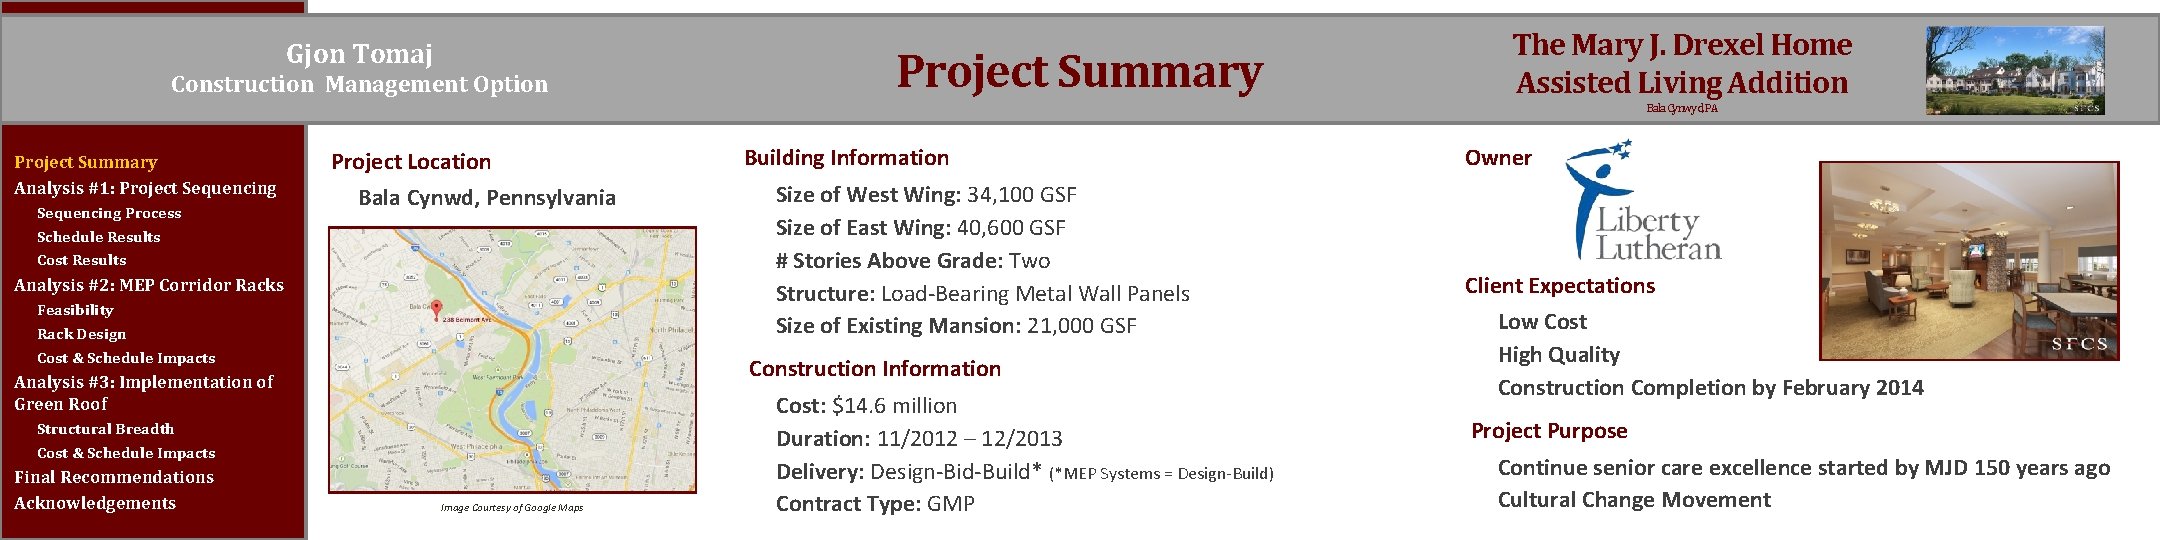 Gjon Tomaj Construction Management Option Project Summary The Mary J. Drexel Home Assisted Living